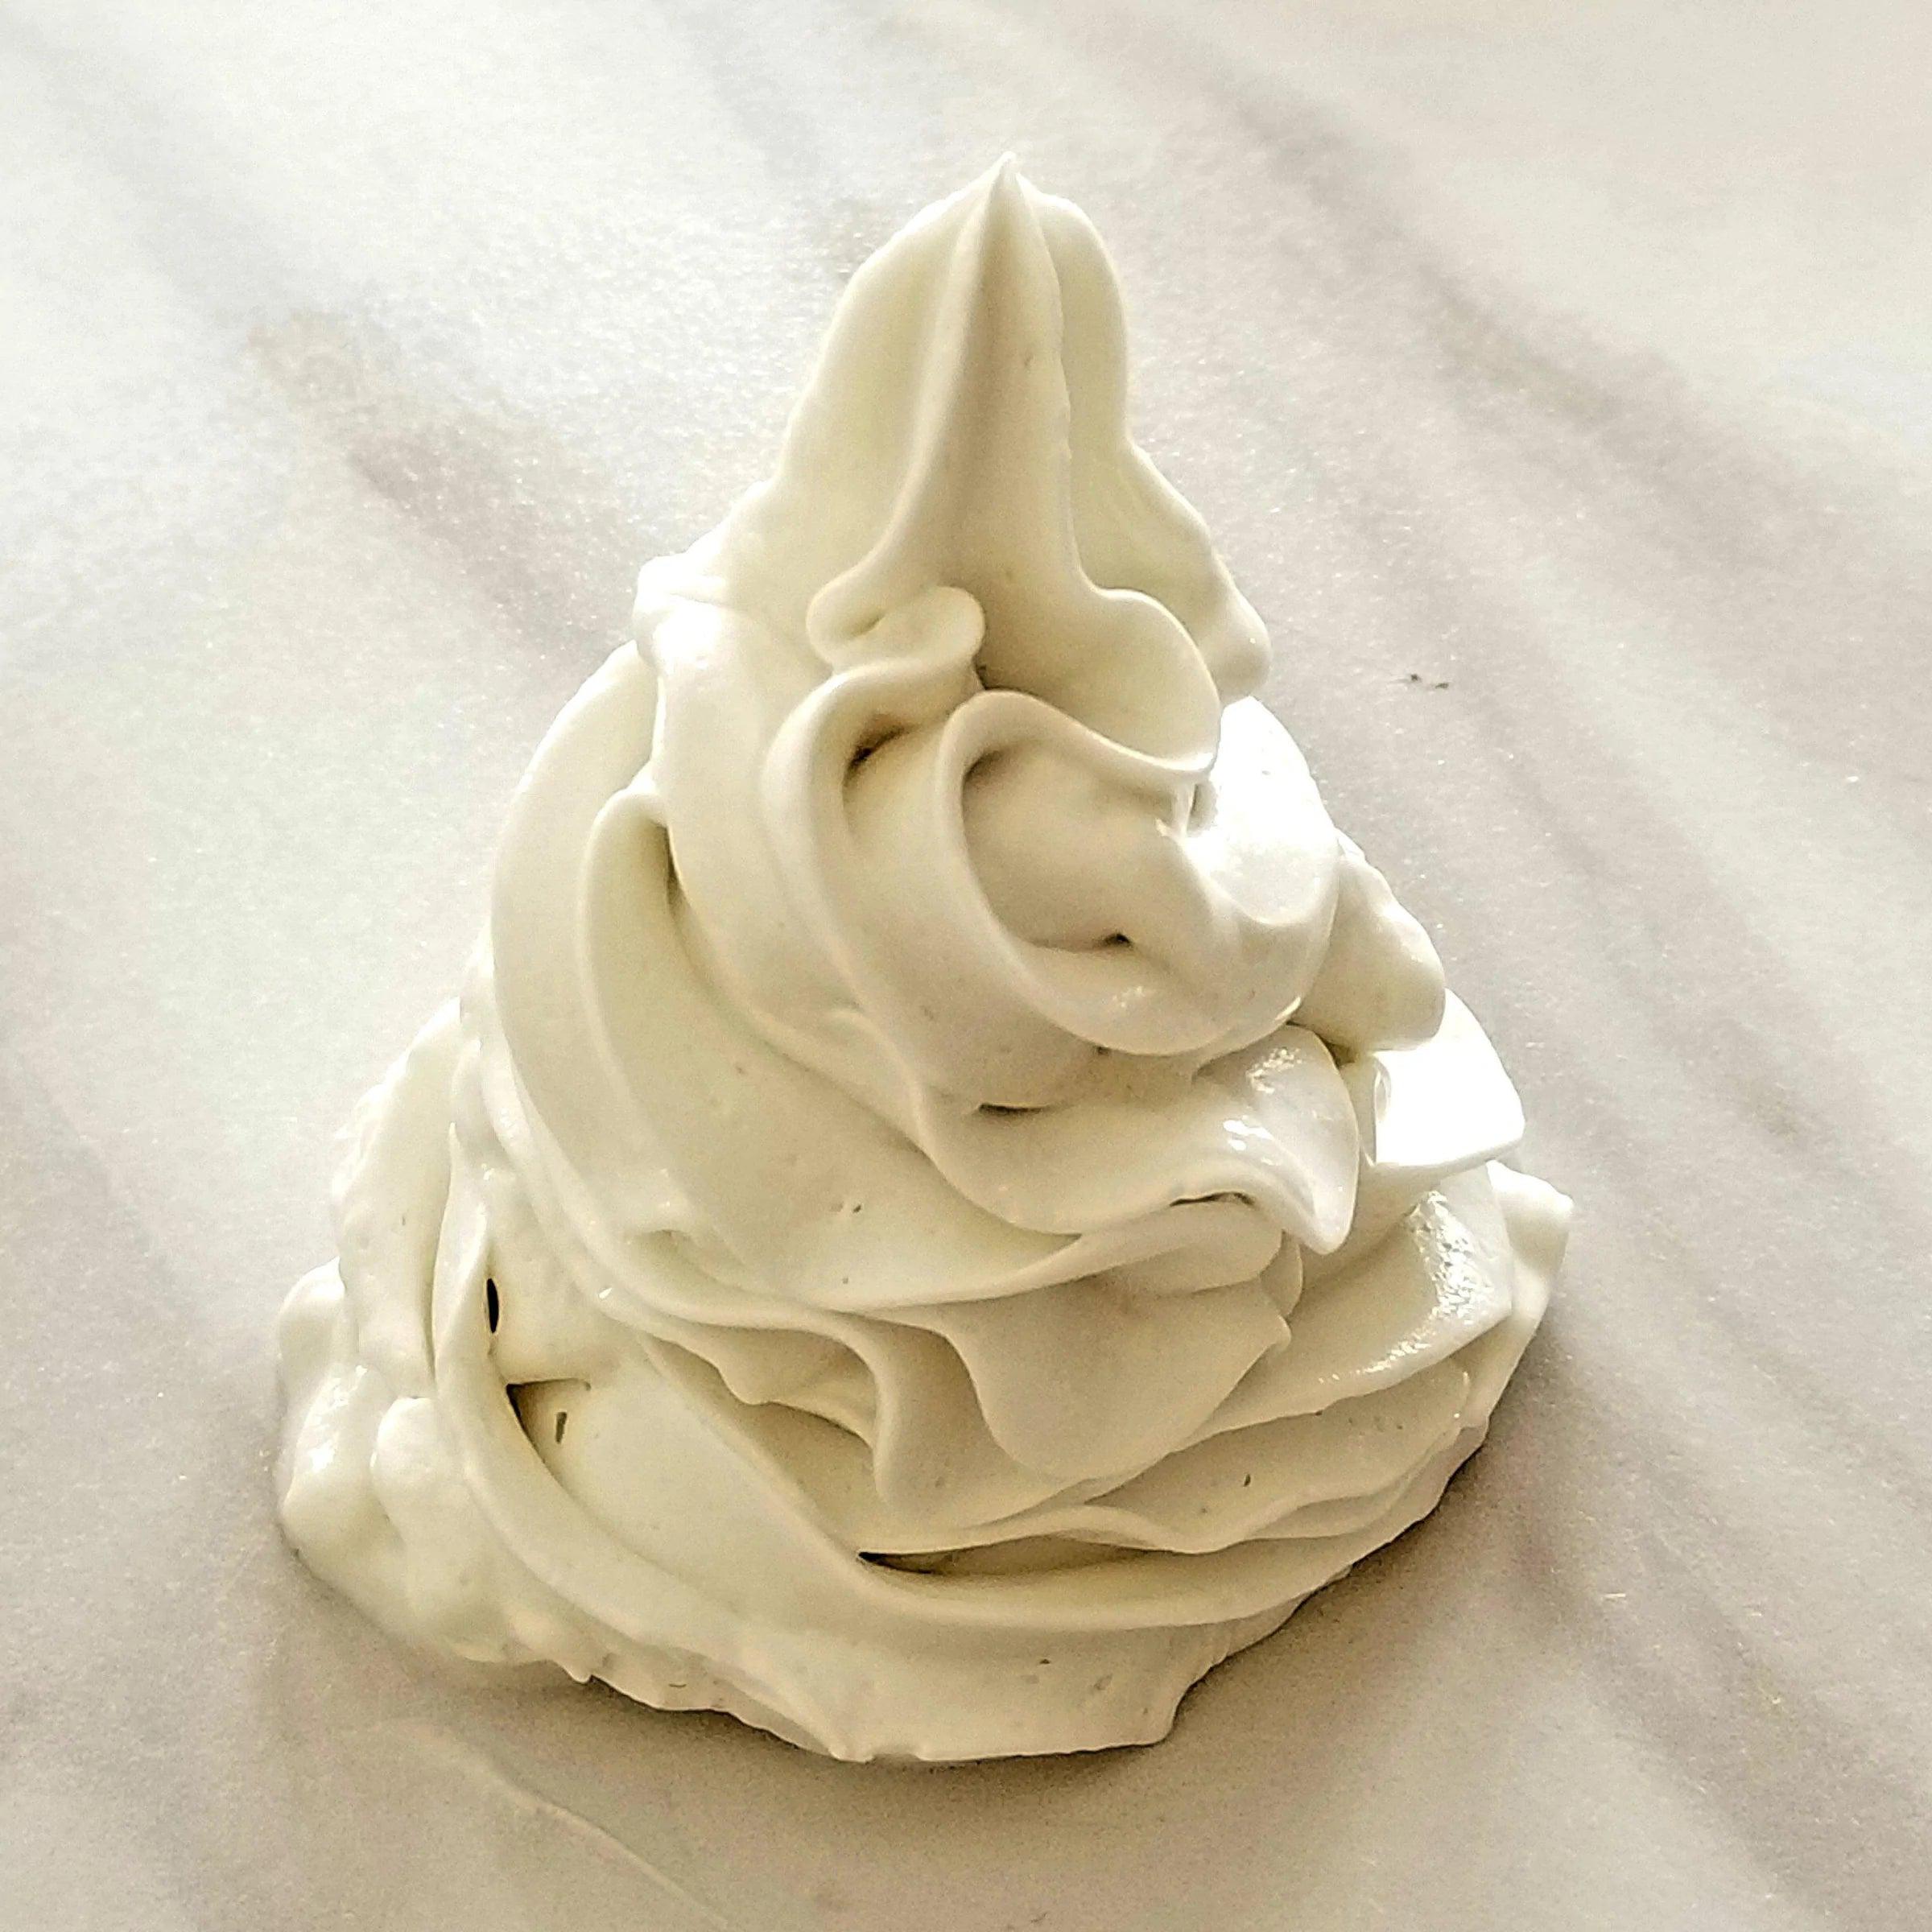 Black Tie Whipped Butter